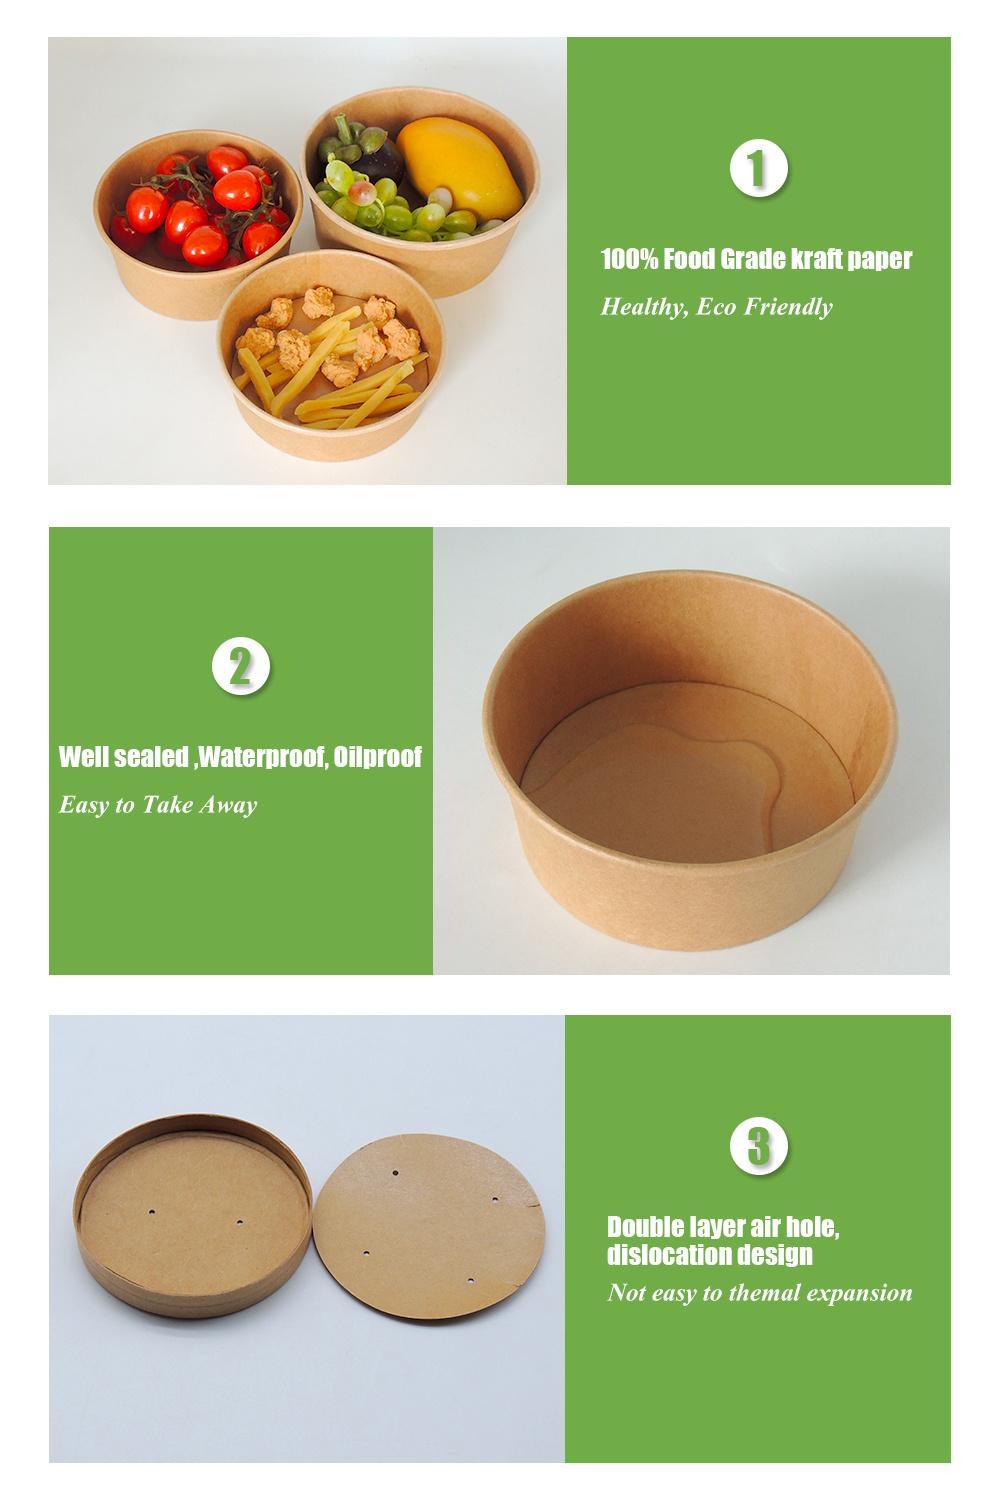 Hot Sale Paper Bowl Containers Paper Bowls Food Packing Containers